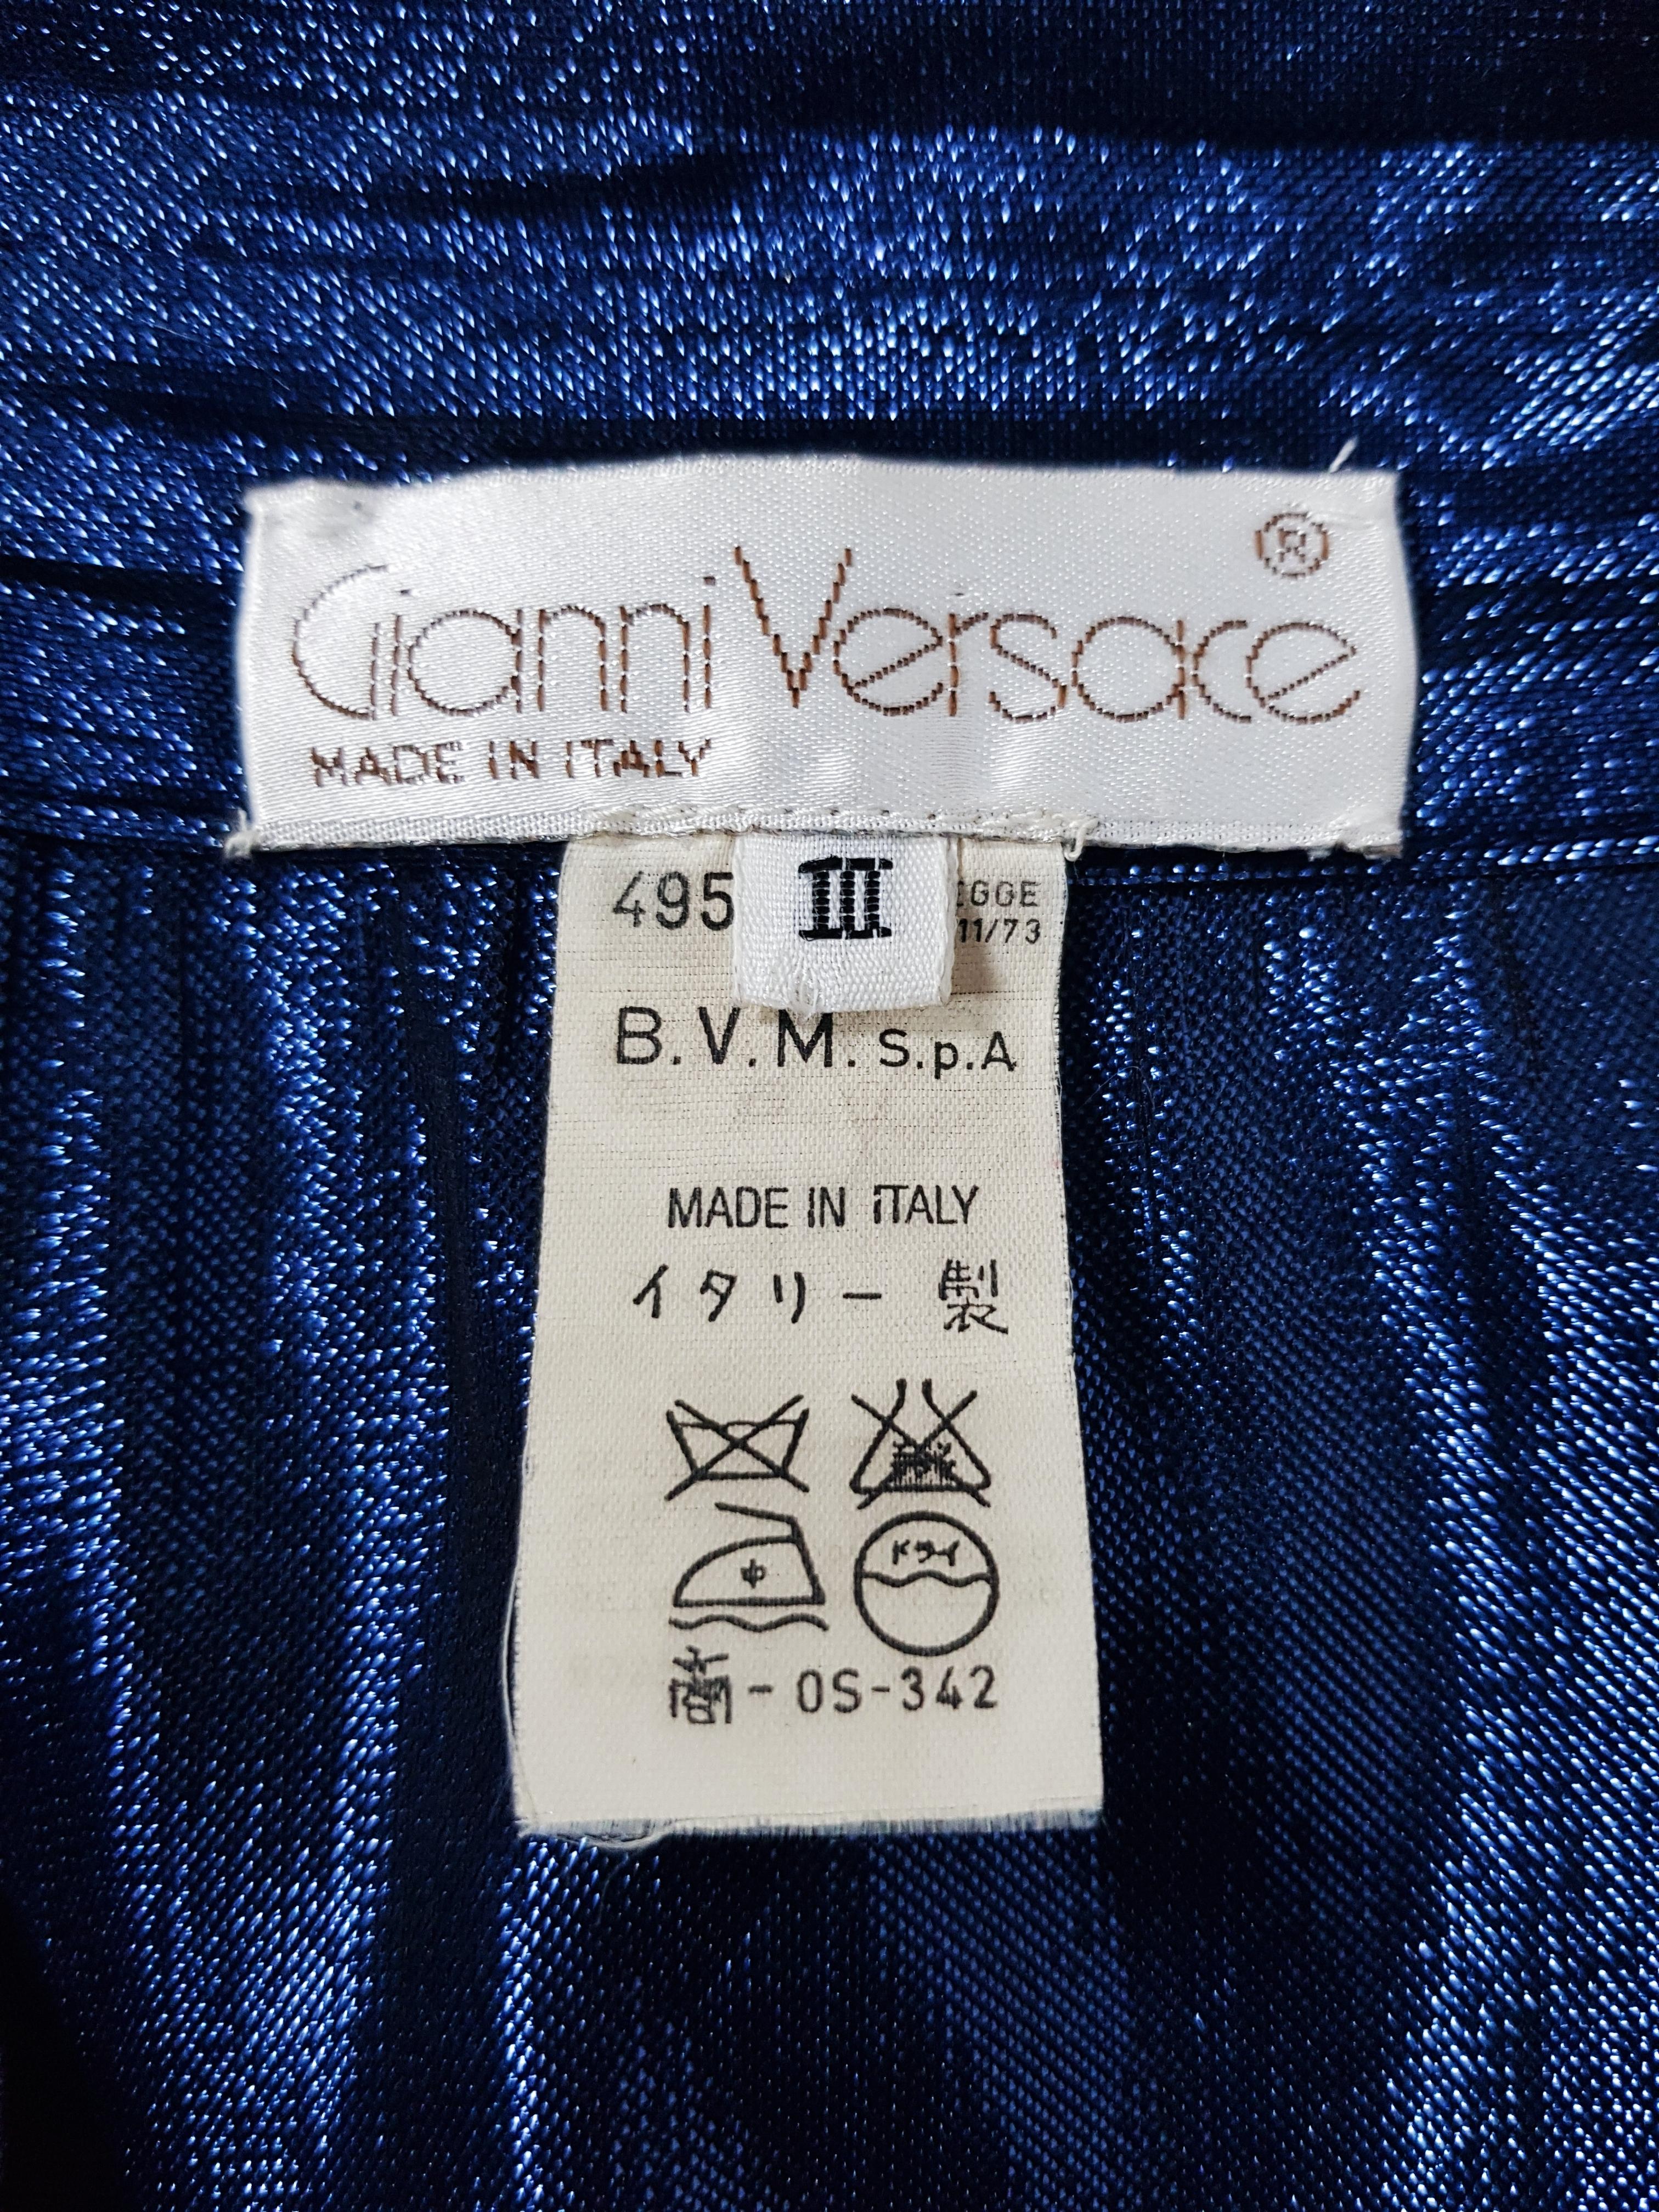 Rare Gianni Versace deep blue pleated silk skirt

-Closed by side zipper
-Belt loops
-Made in Italy
-Circa 1979-1989
-80% Silk - 20% Polyester
-Estimated size: 40 FR (marked as III )
-Very good condition
